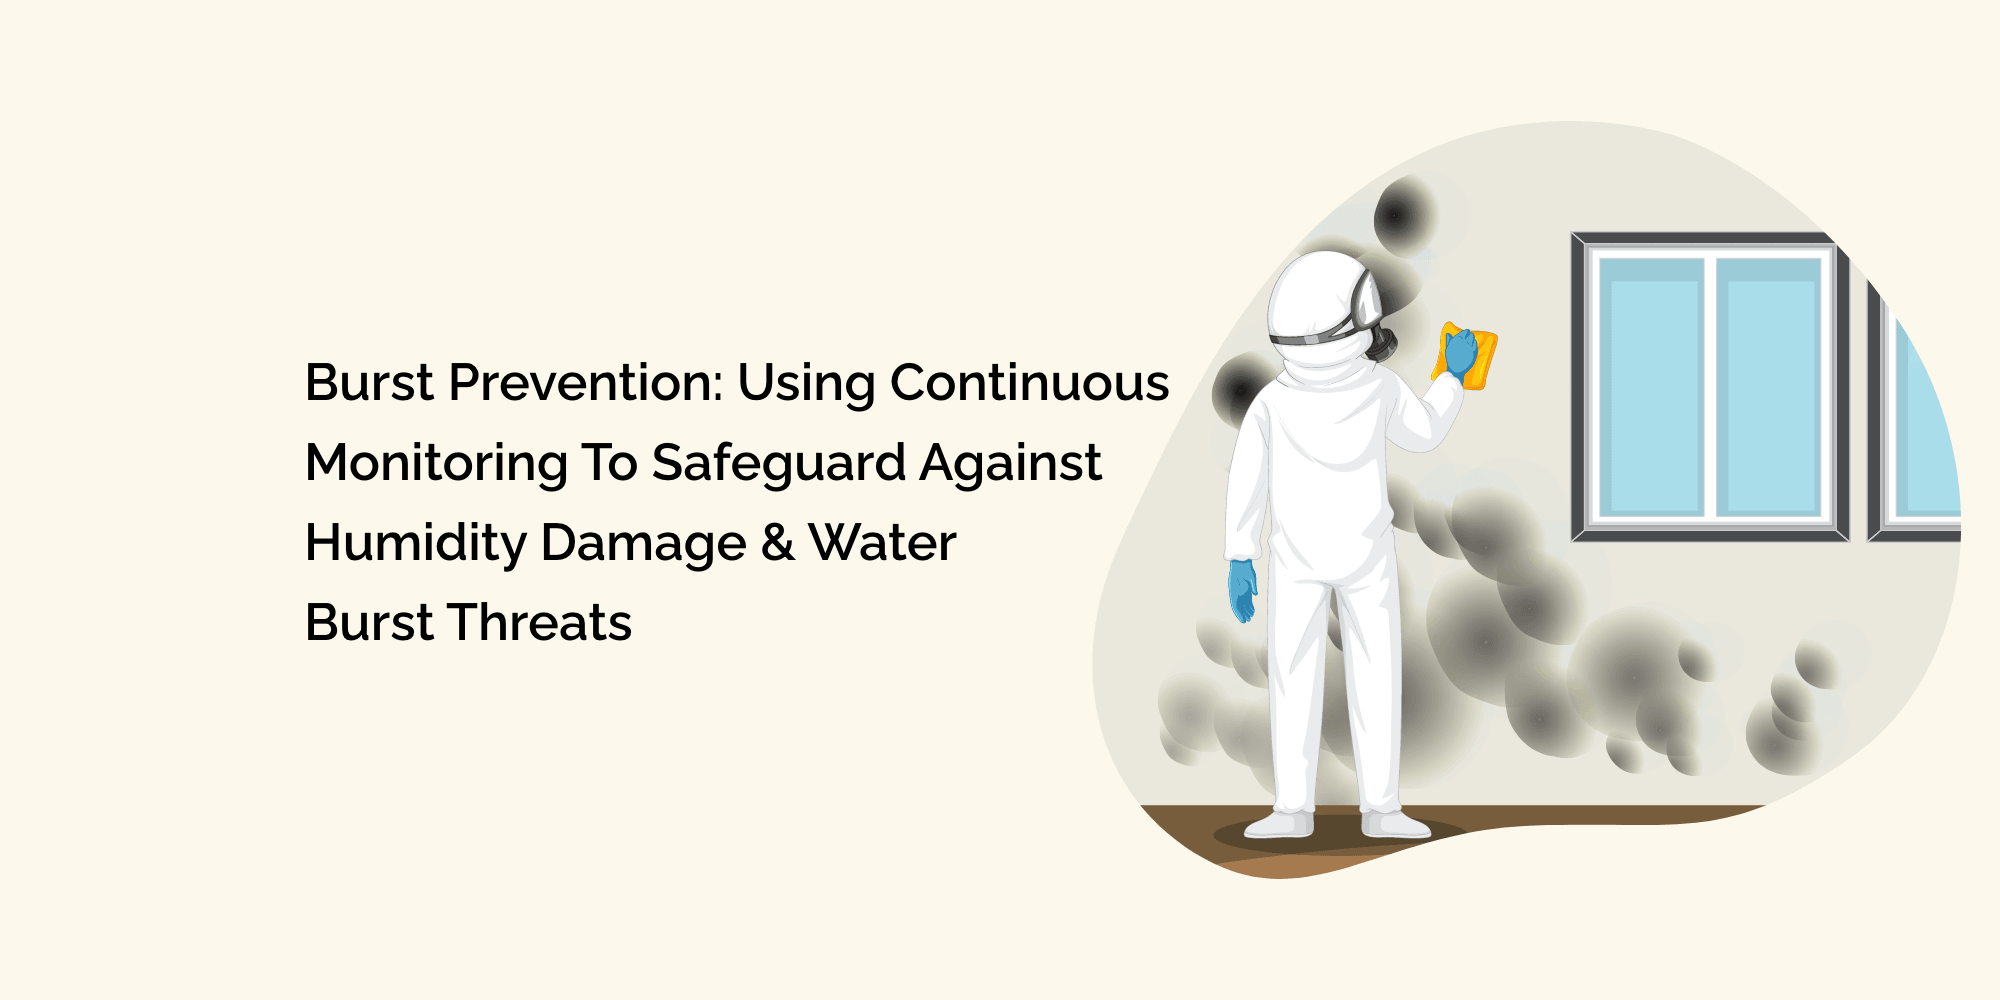 Burst Prevention: Using Continuous Monitoring to Safeguard against Humidity Damage & Water Burst Threats